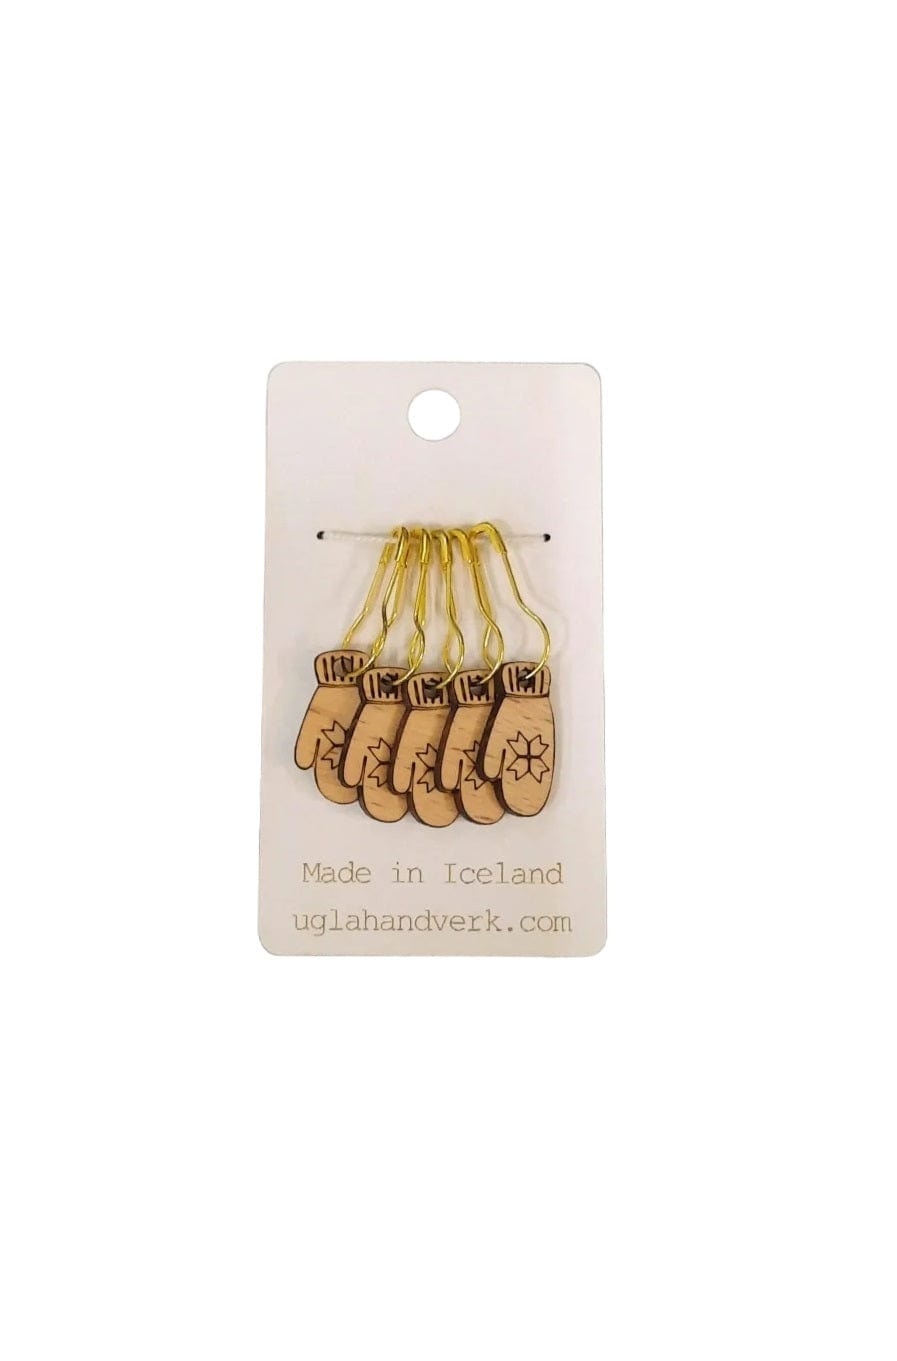  Icelandic wool mittens laser-engraved wooden stitch markers for knitting and crochet projects